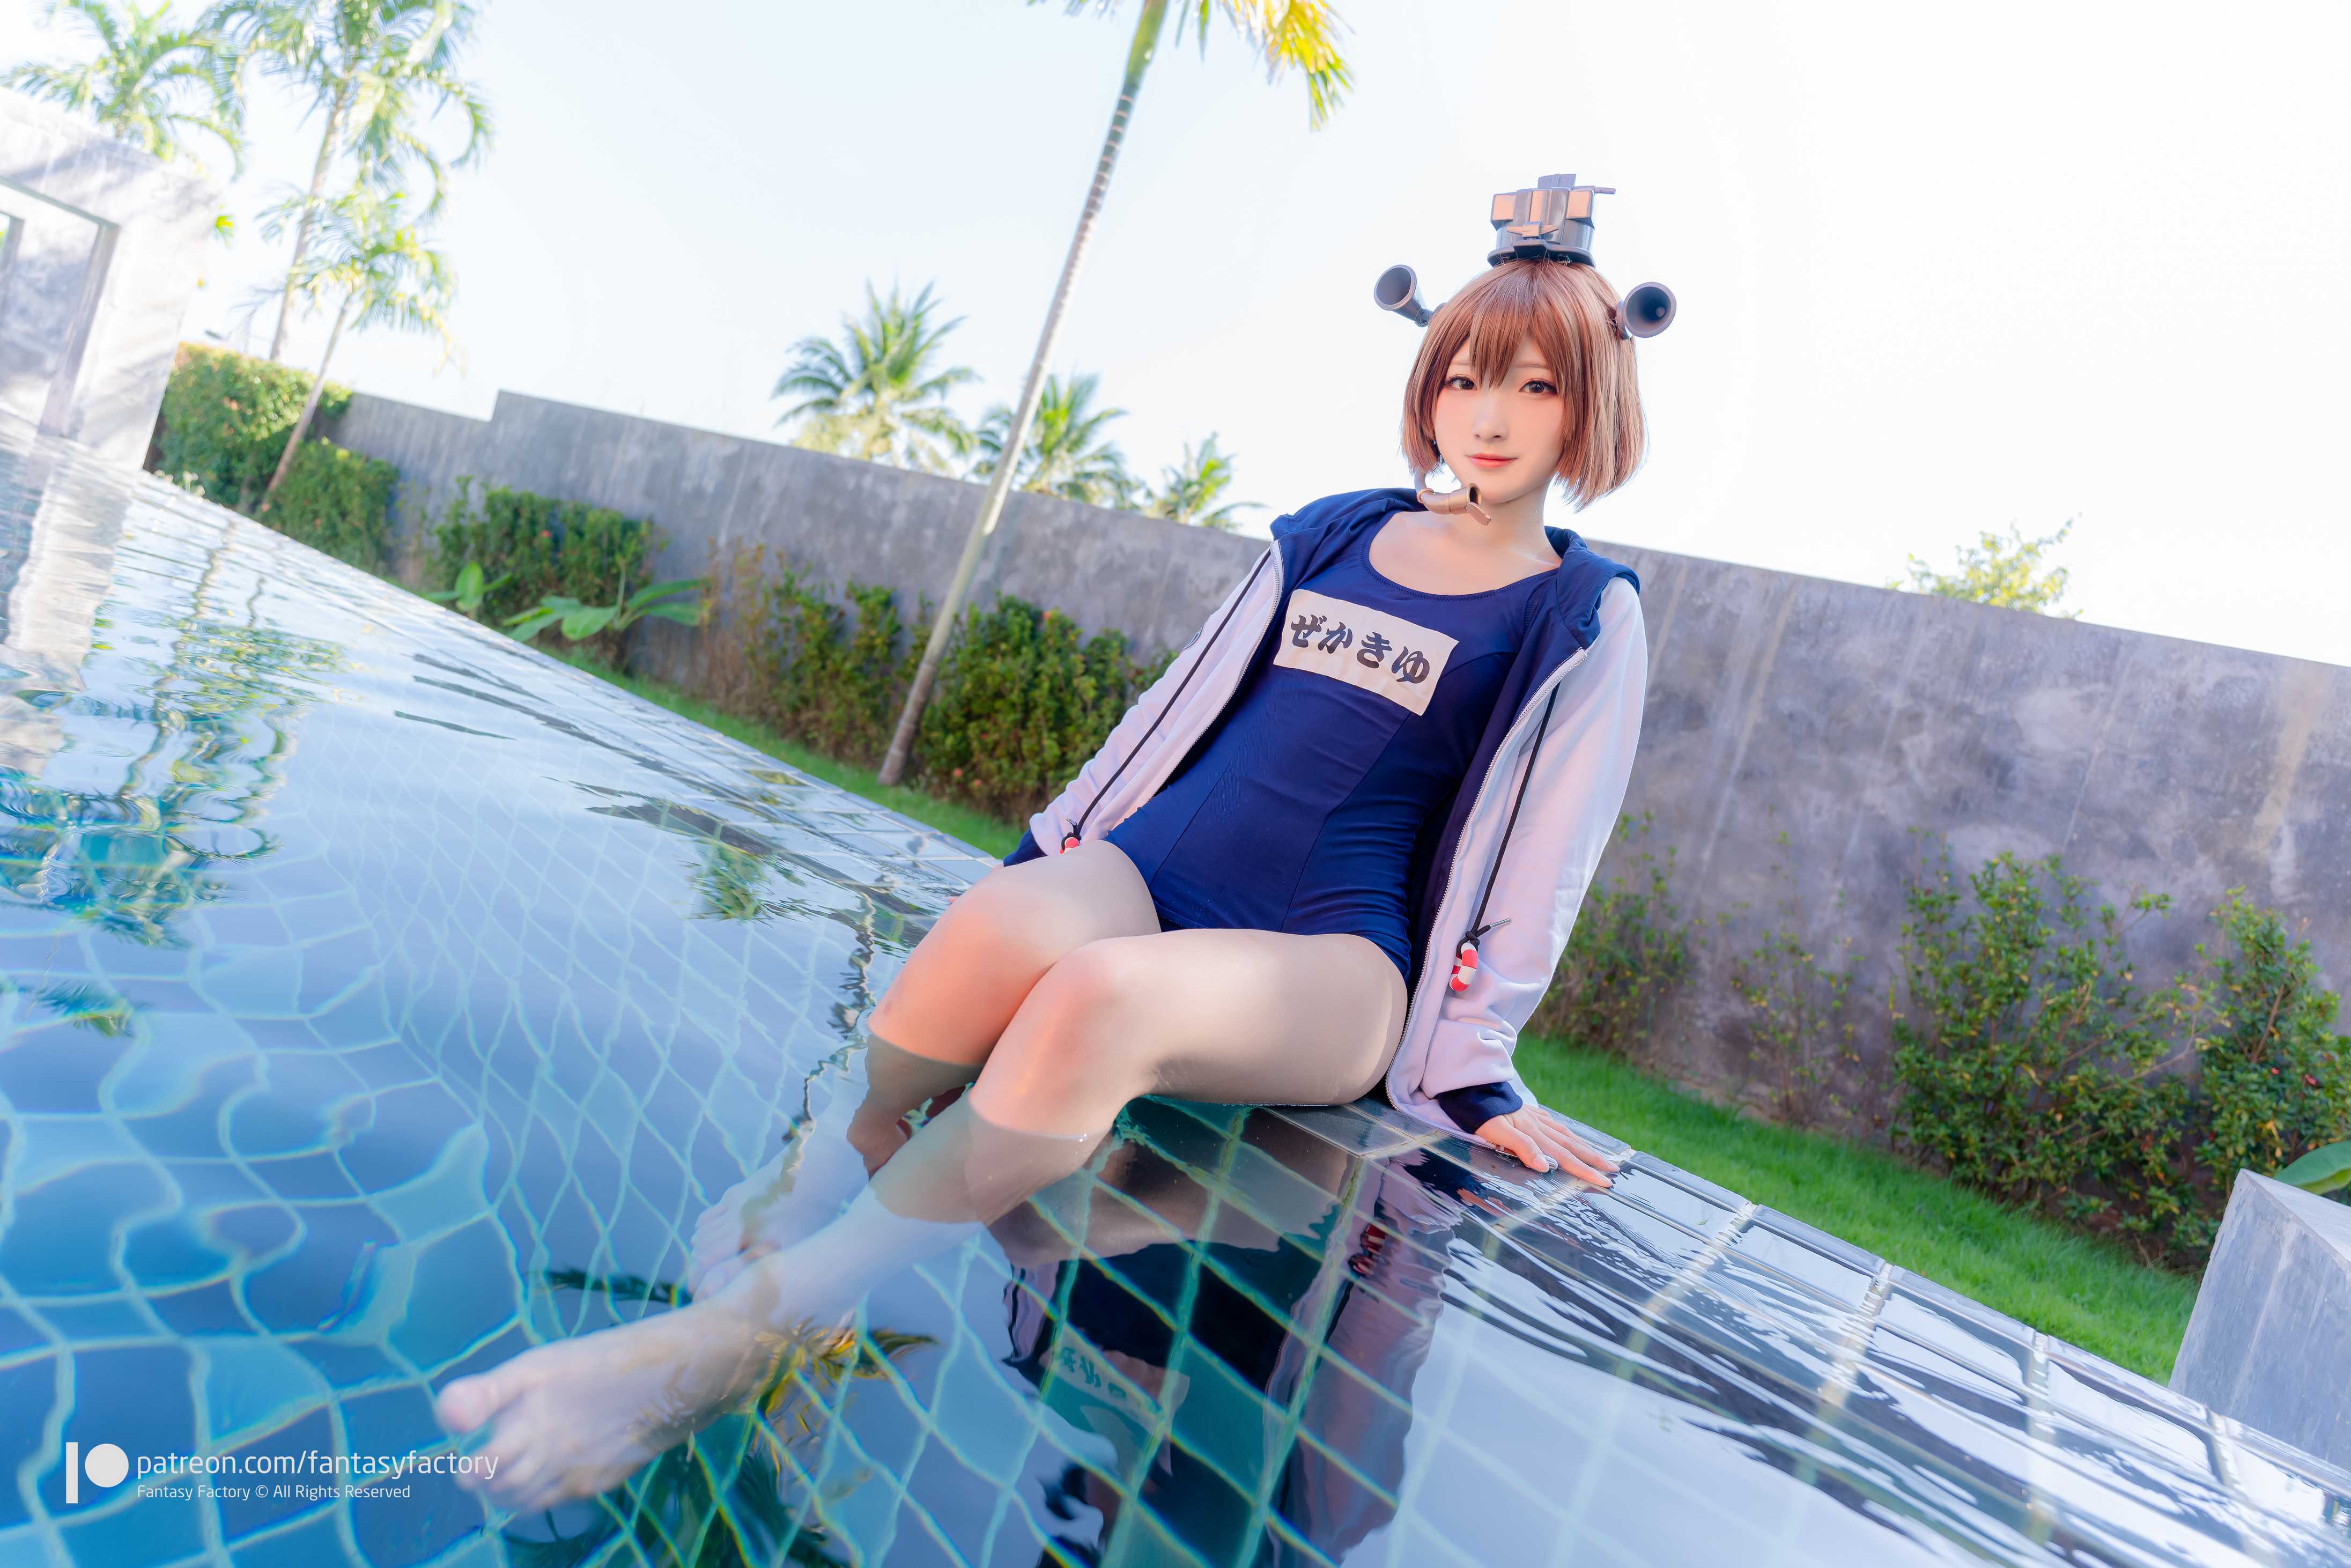 Coser by the swimming pool